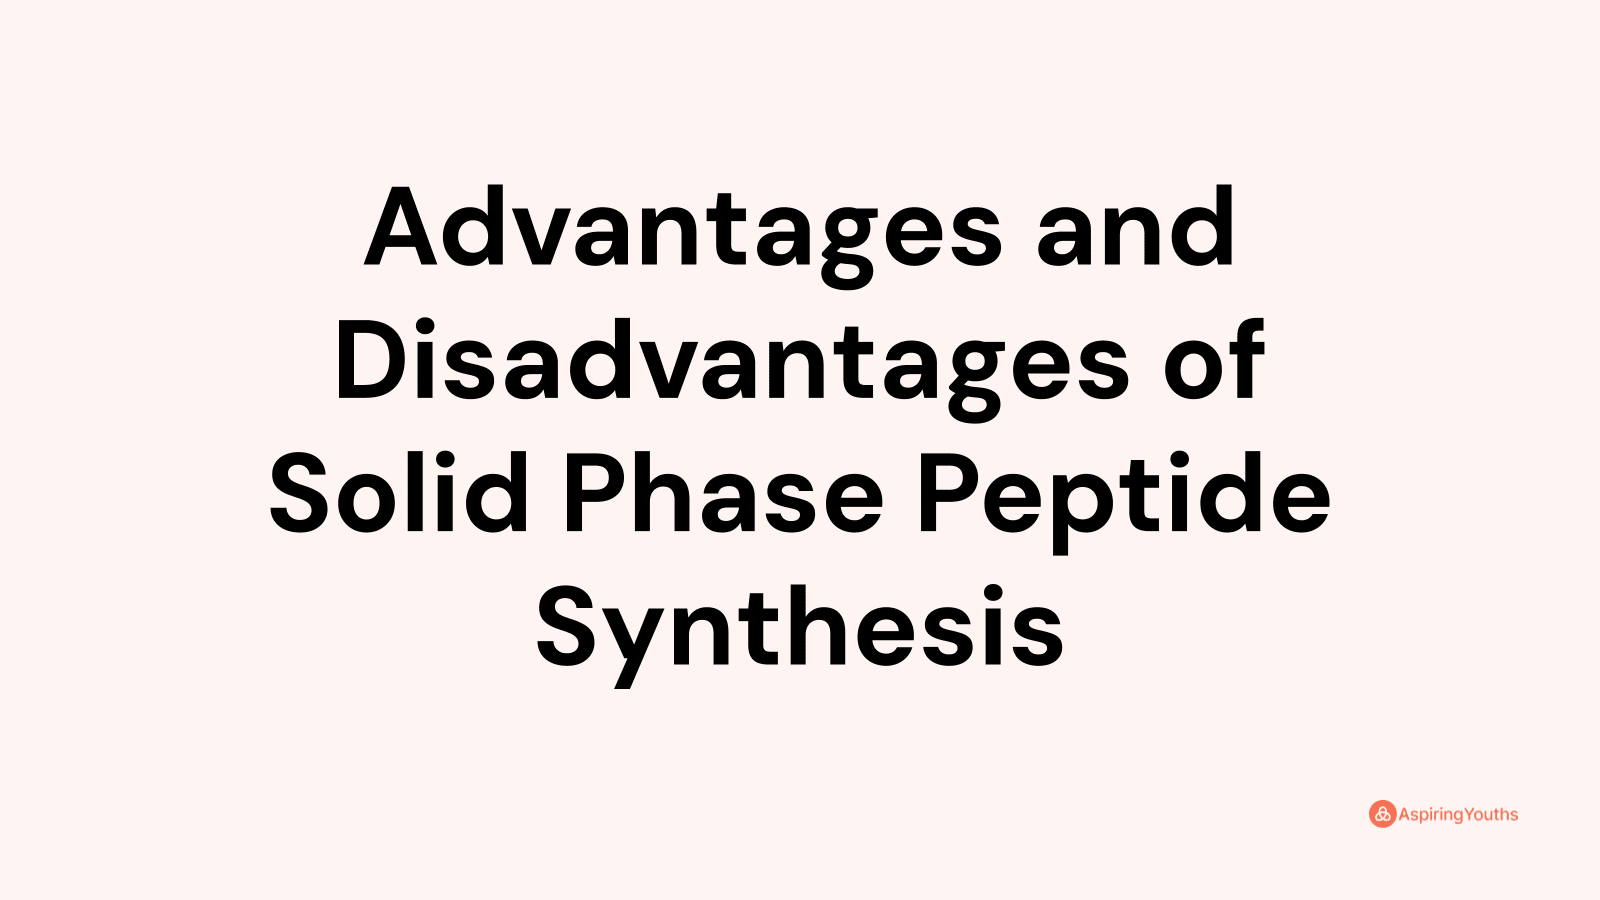 Advantages and disadvantages of Solid Phase Peptide Synthesis